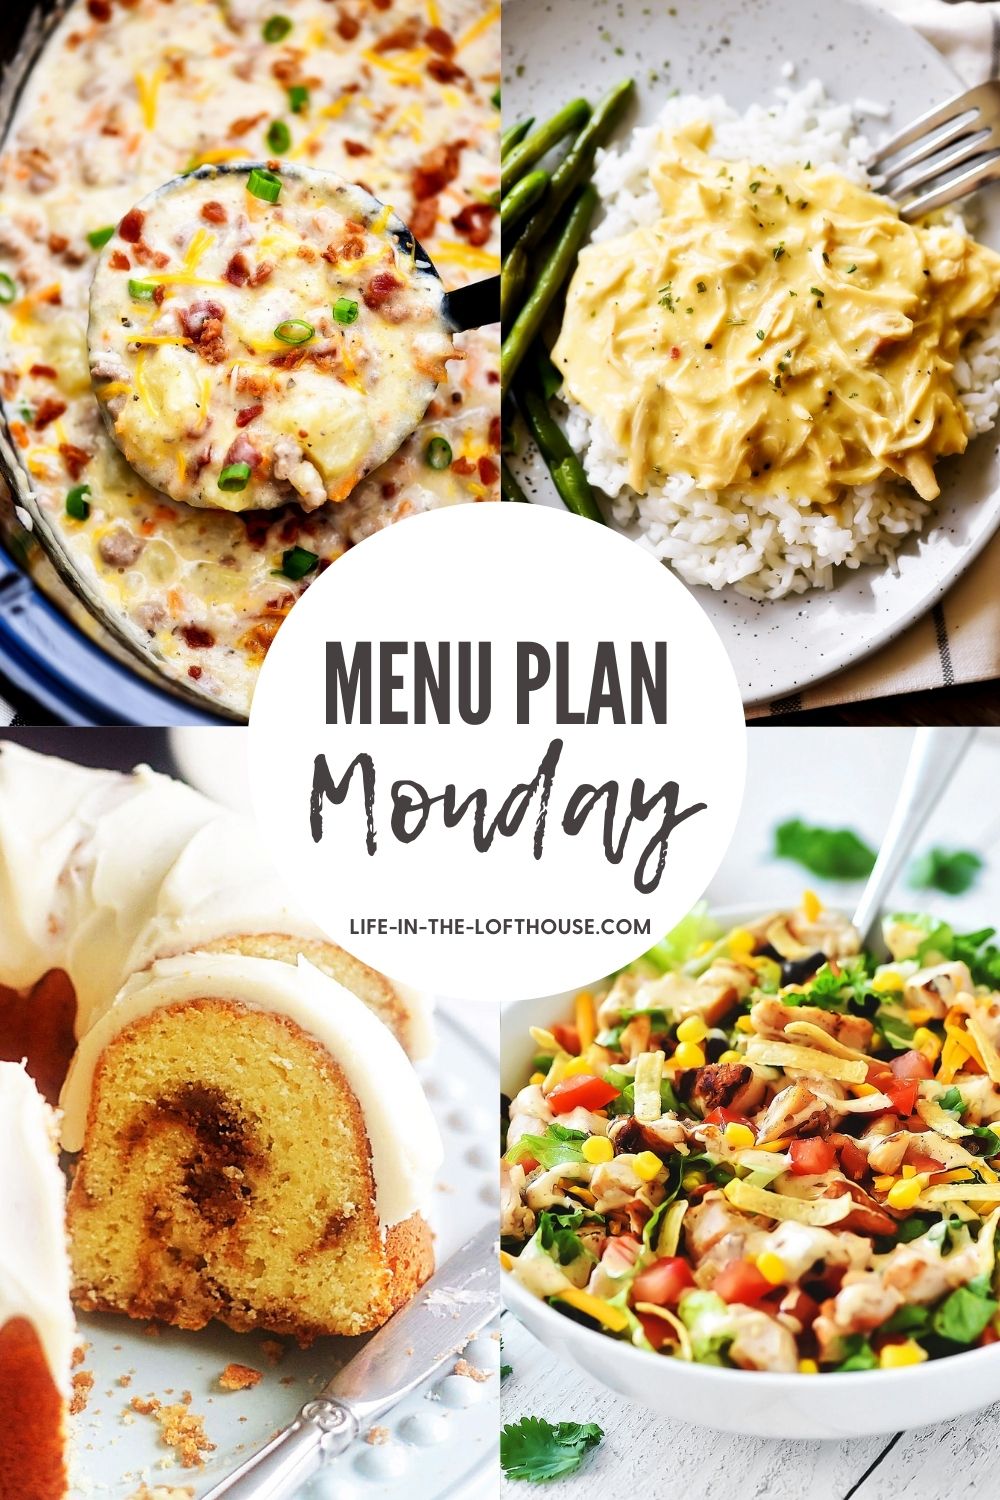 Menu Plan Monday is a list of six dinners and one dessert idea. Life-in-the-Lofthouse.com